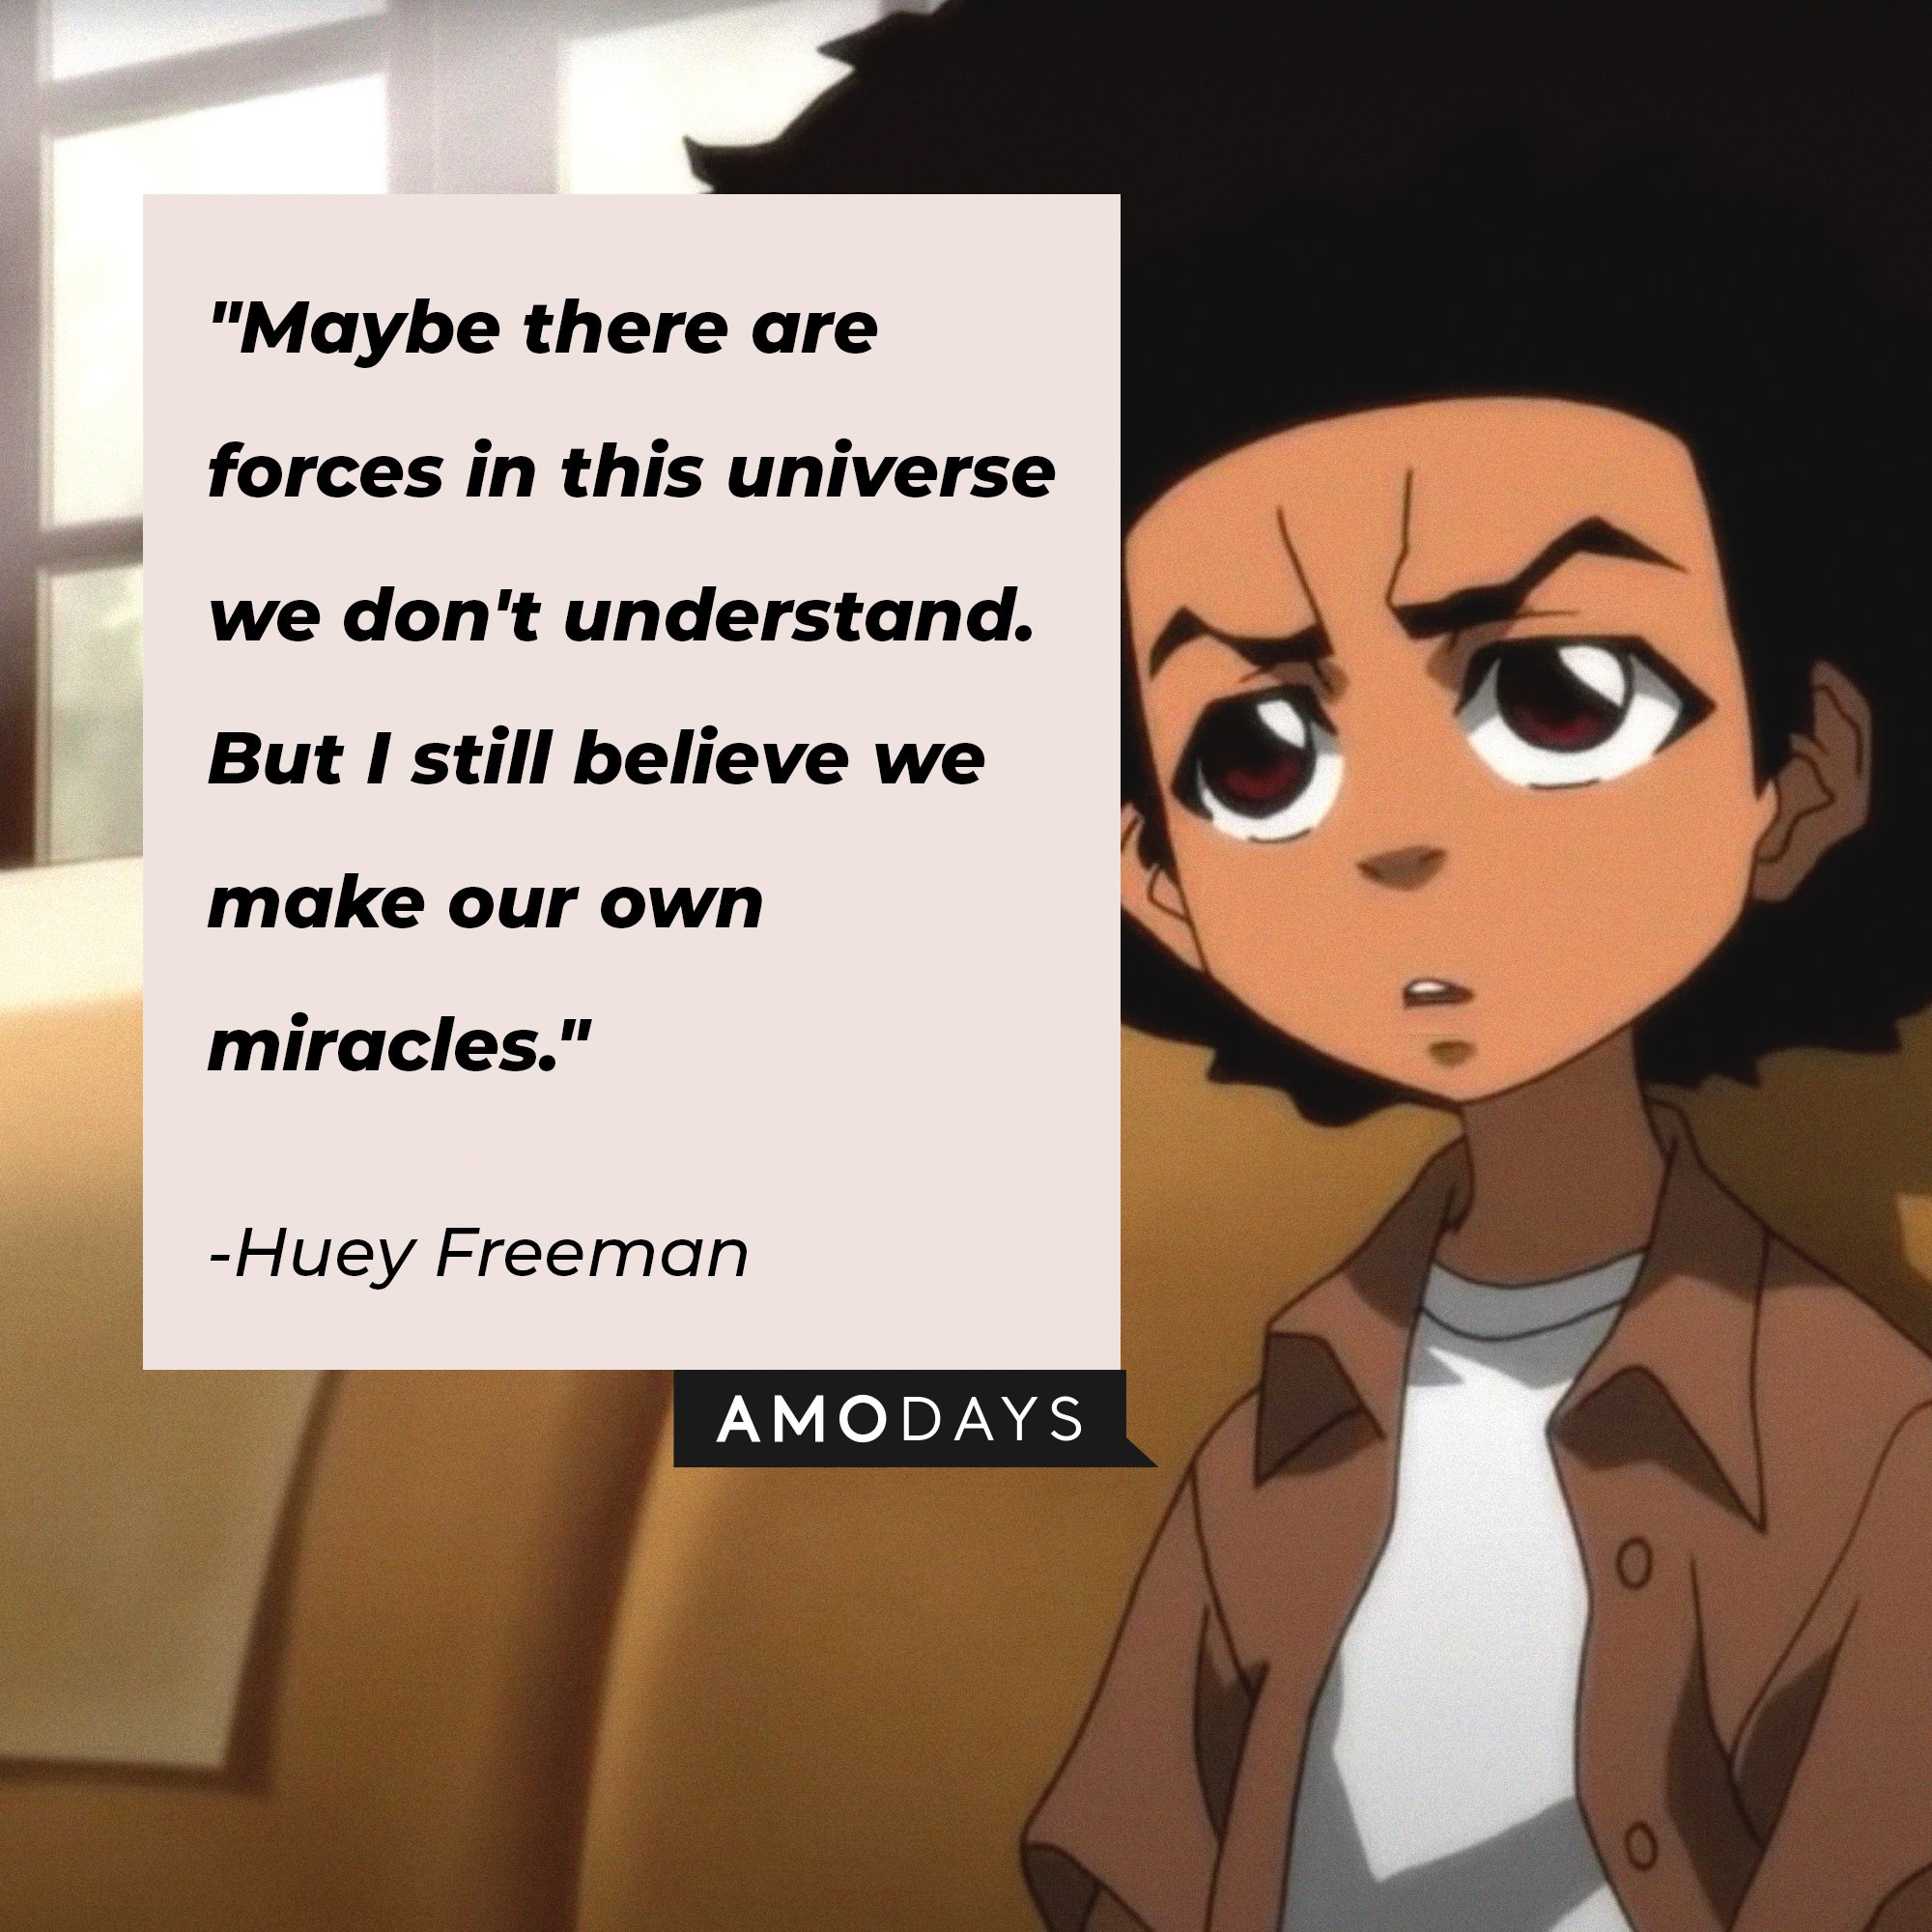 Huey Freeman’s quote: "Maybe there are forces in this universe we don't understand. But I still believe we make our own miracles."  | Image: AmoDays